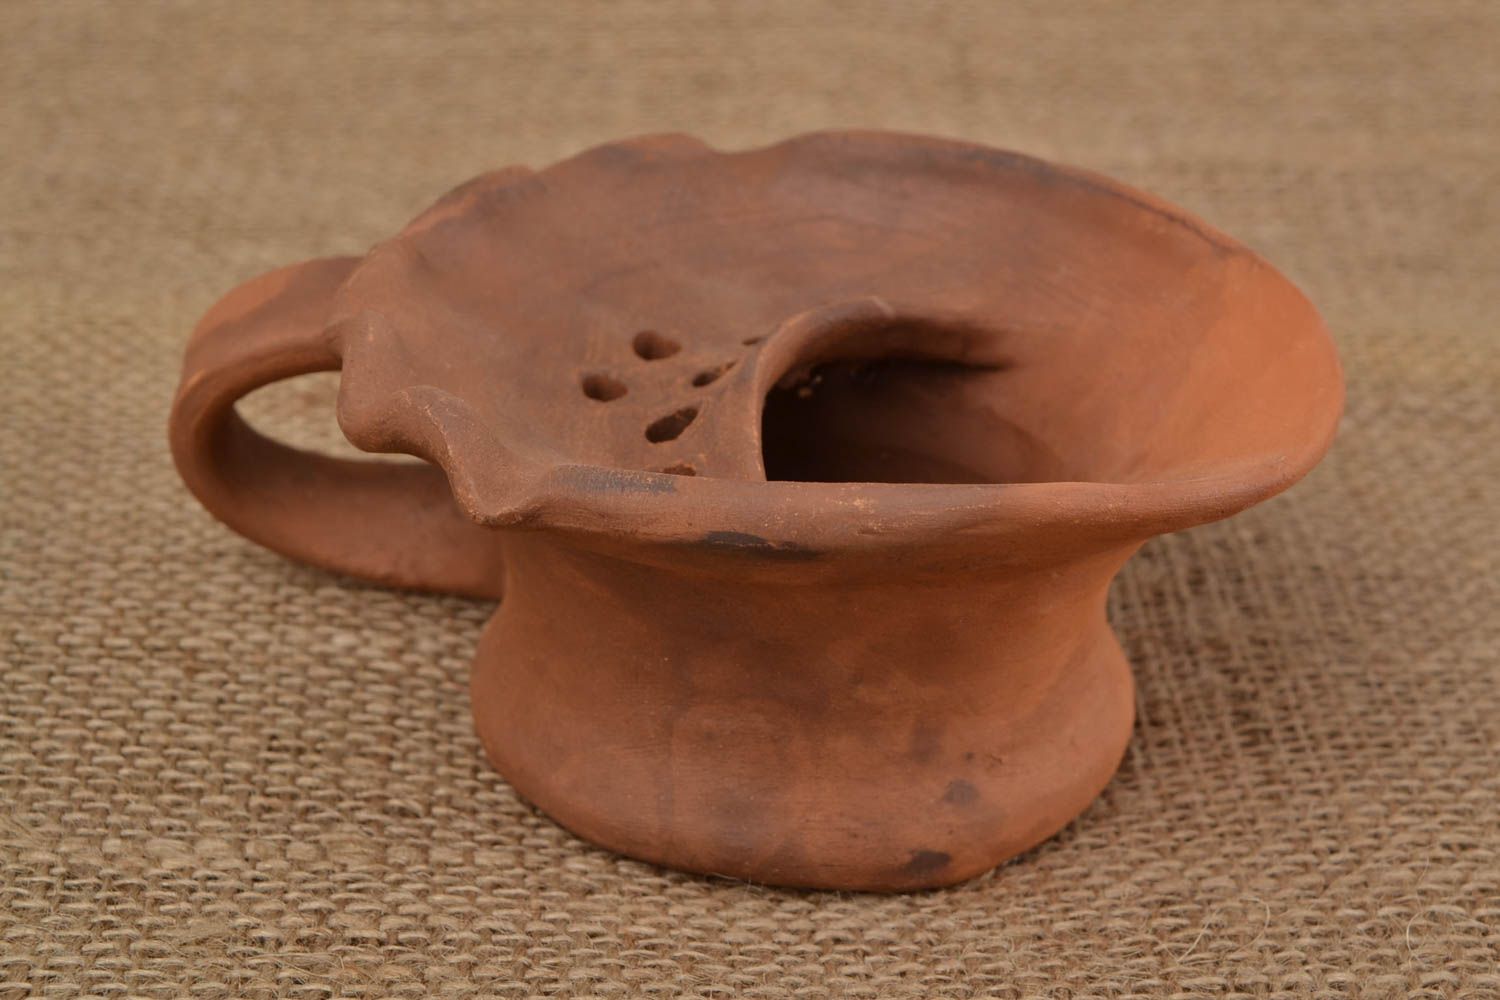 Handmade unusual ash-tray made of clay using pottery technique with handle photo 1